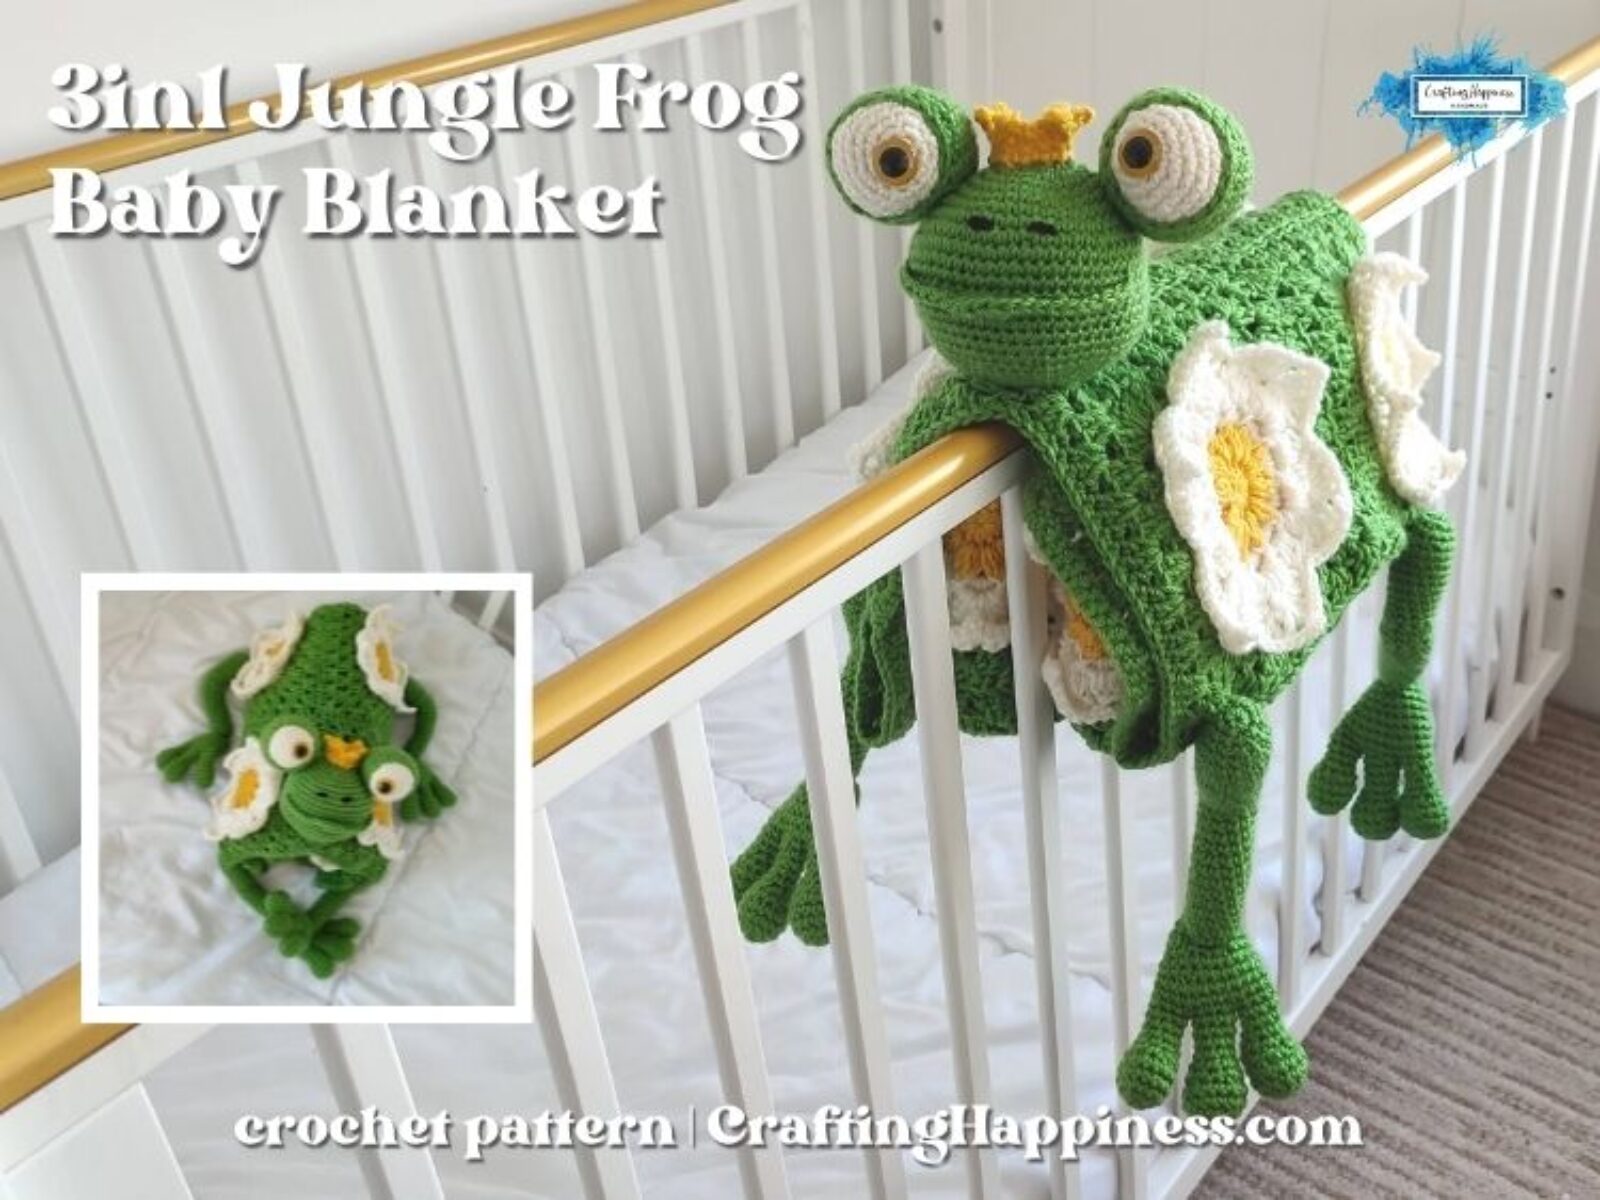 FB BLOG POSTER - 3in1 Jungle Frog Baby Blanket Crafting Happiness